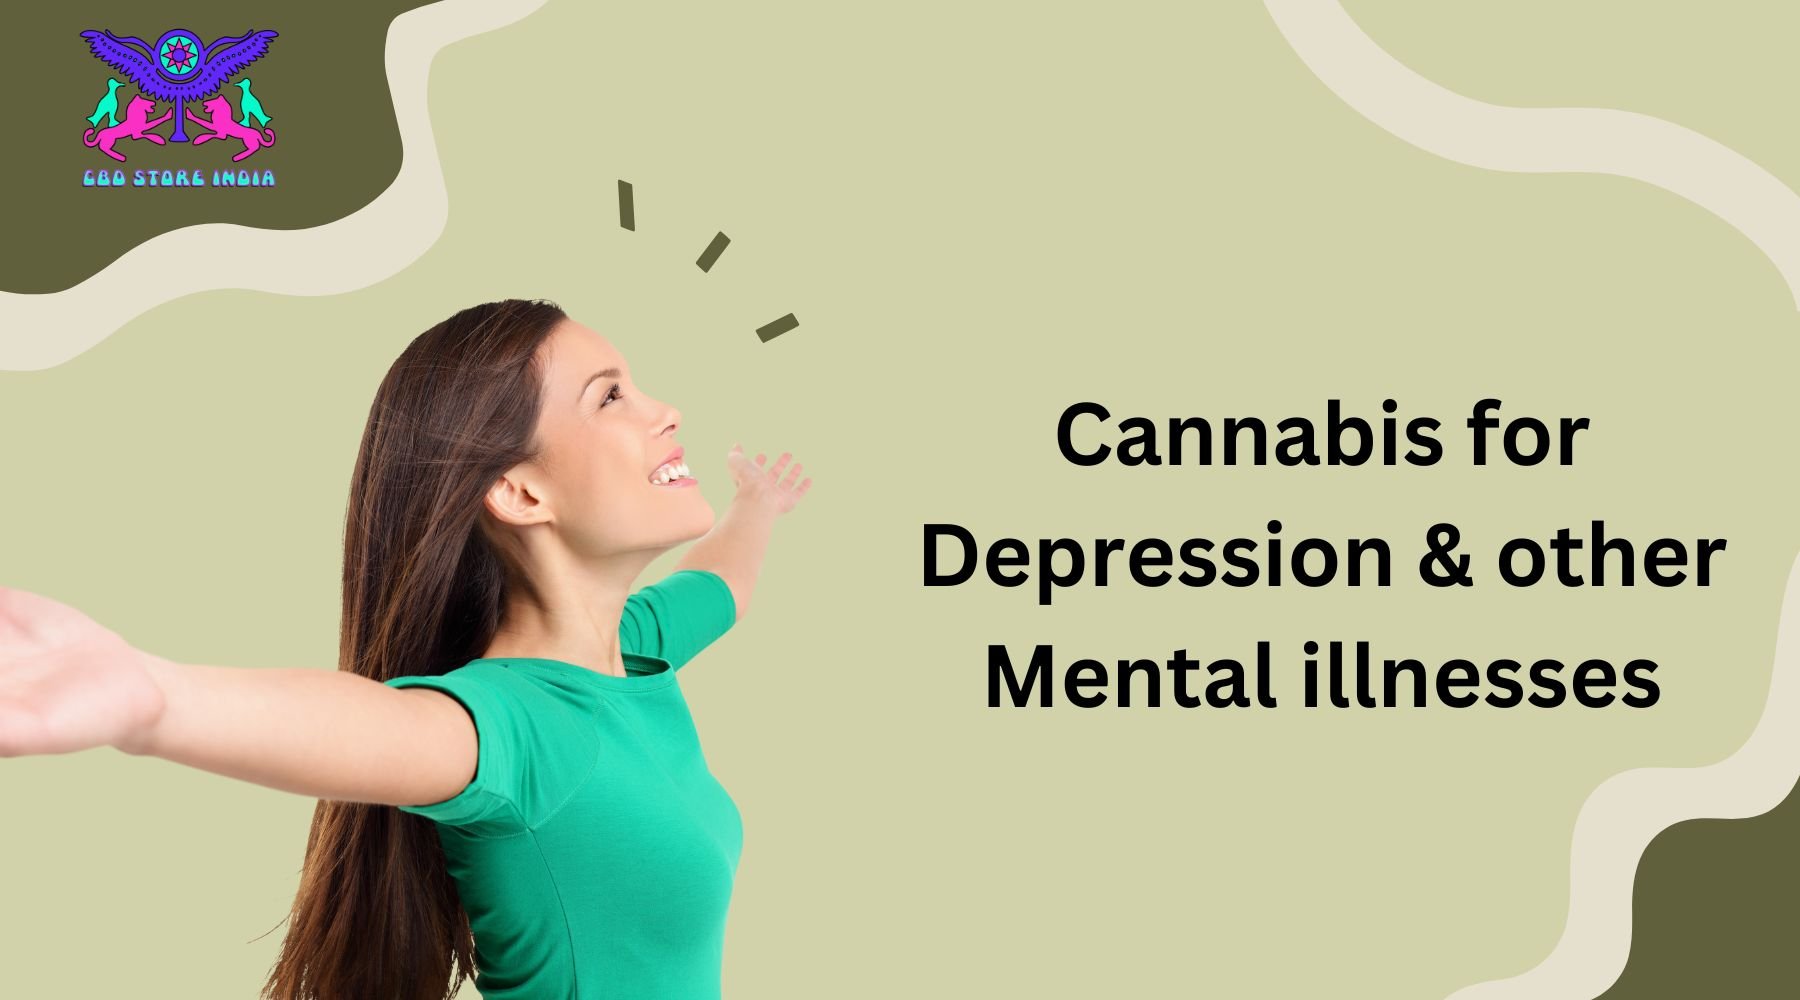 Cannabis for Depression & other Mental illnesses : What the Science says - Article by Dr. Siva (BAMS, MD-Ayurveda) - CBD Store India